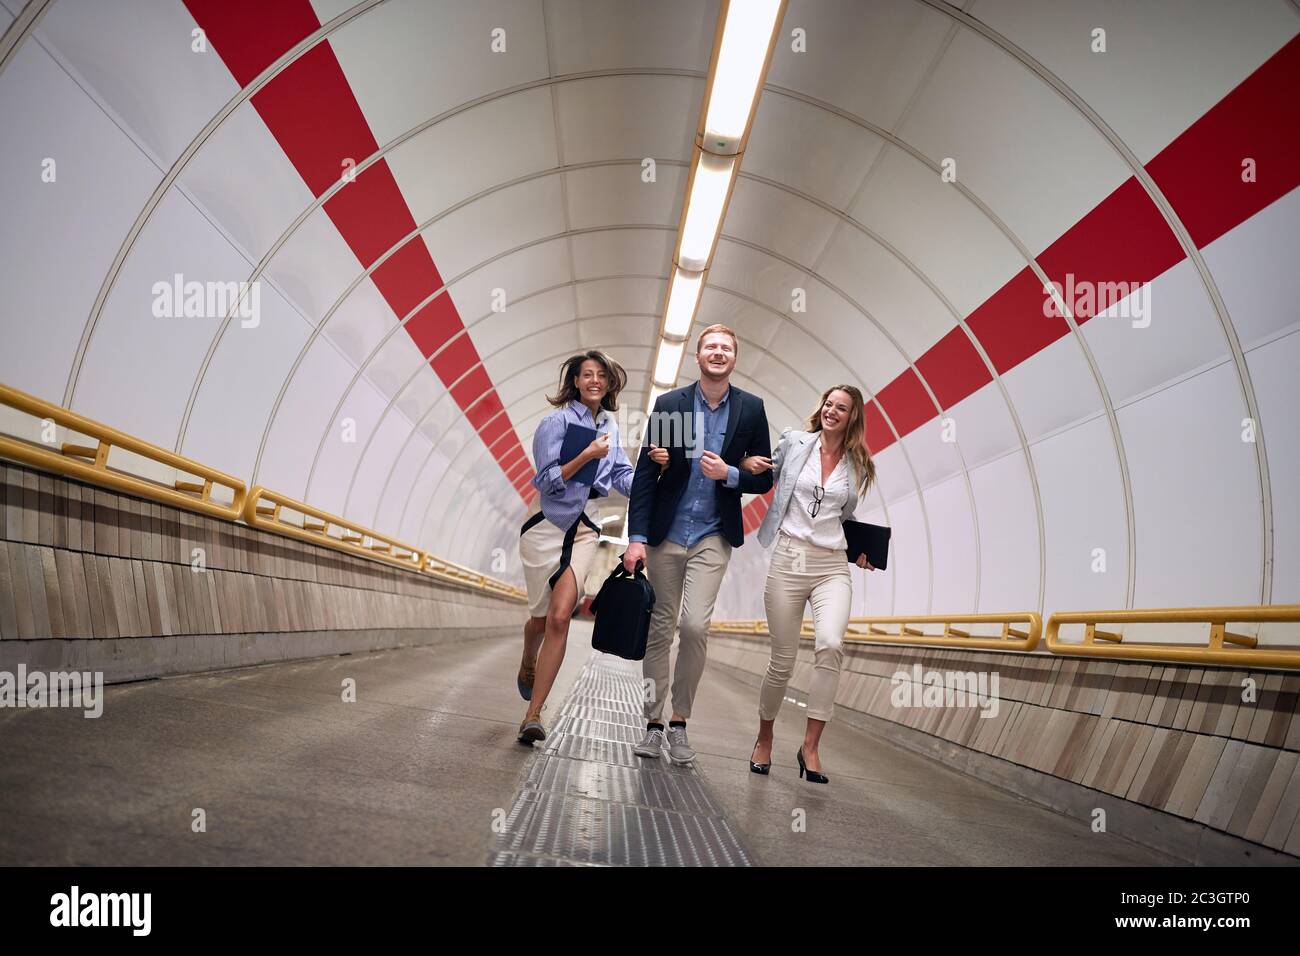 Successful young business people walking to platform at metro station. Stock Photo